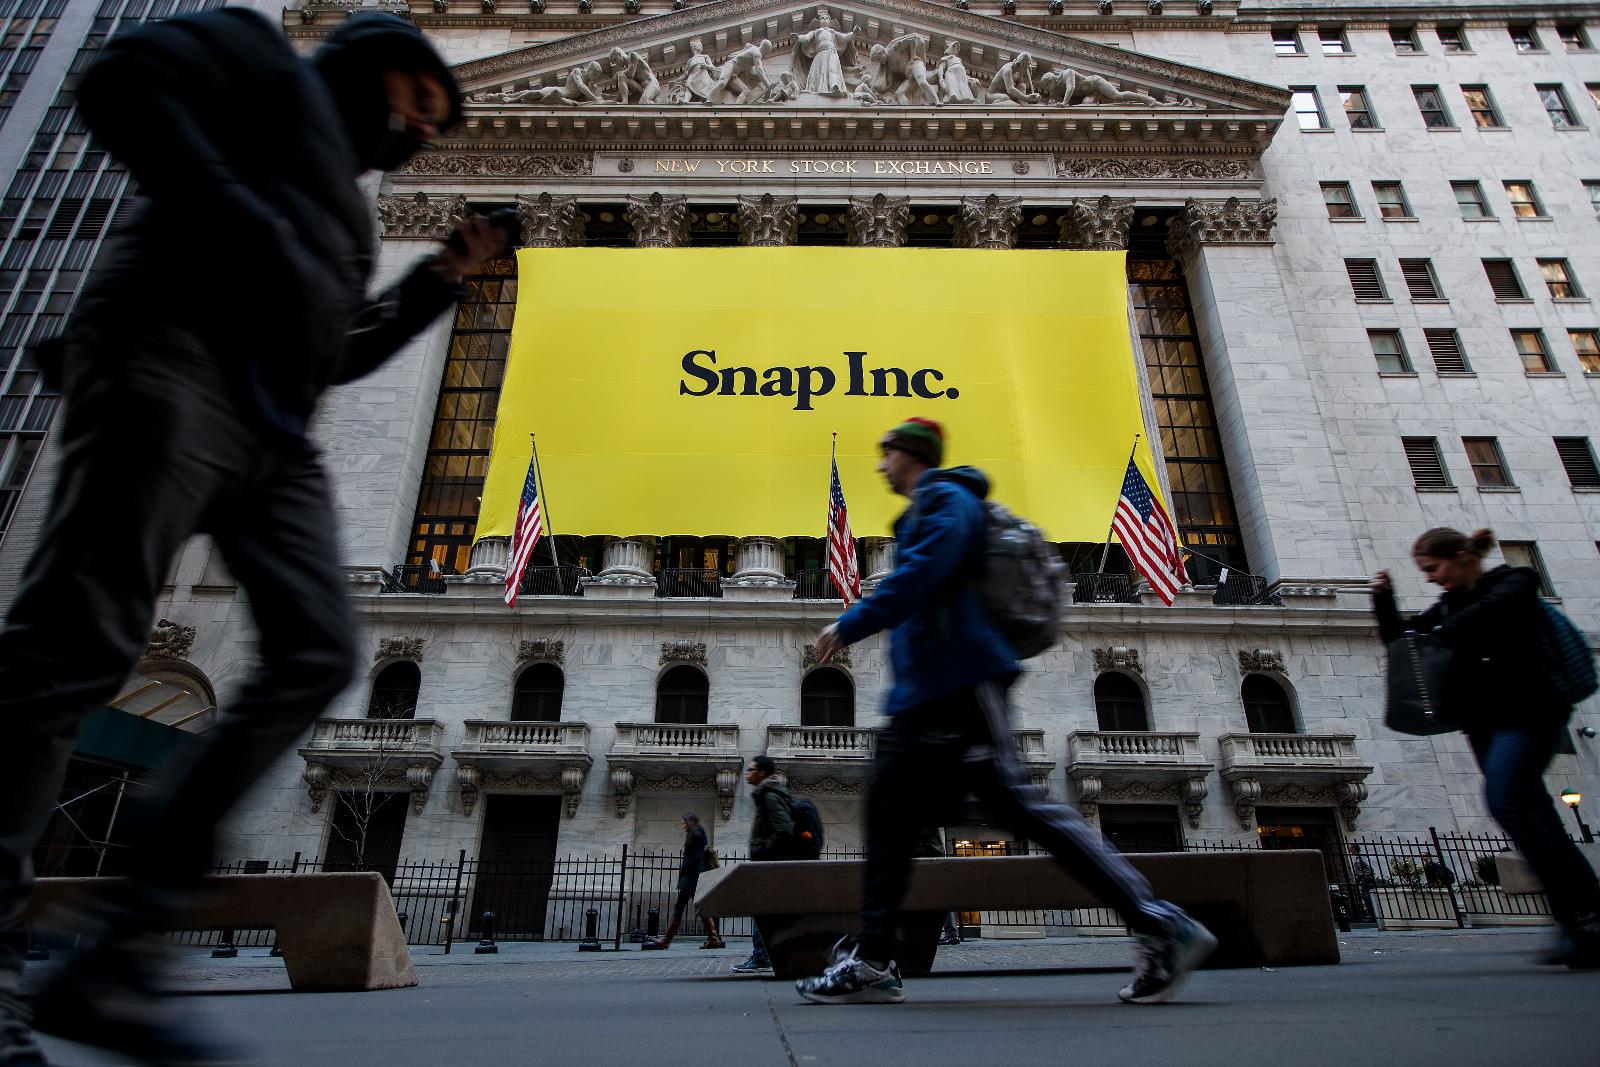 Snap quietly acquired 3D scanning startup Th3rd last year